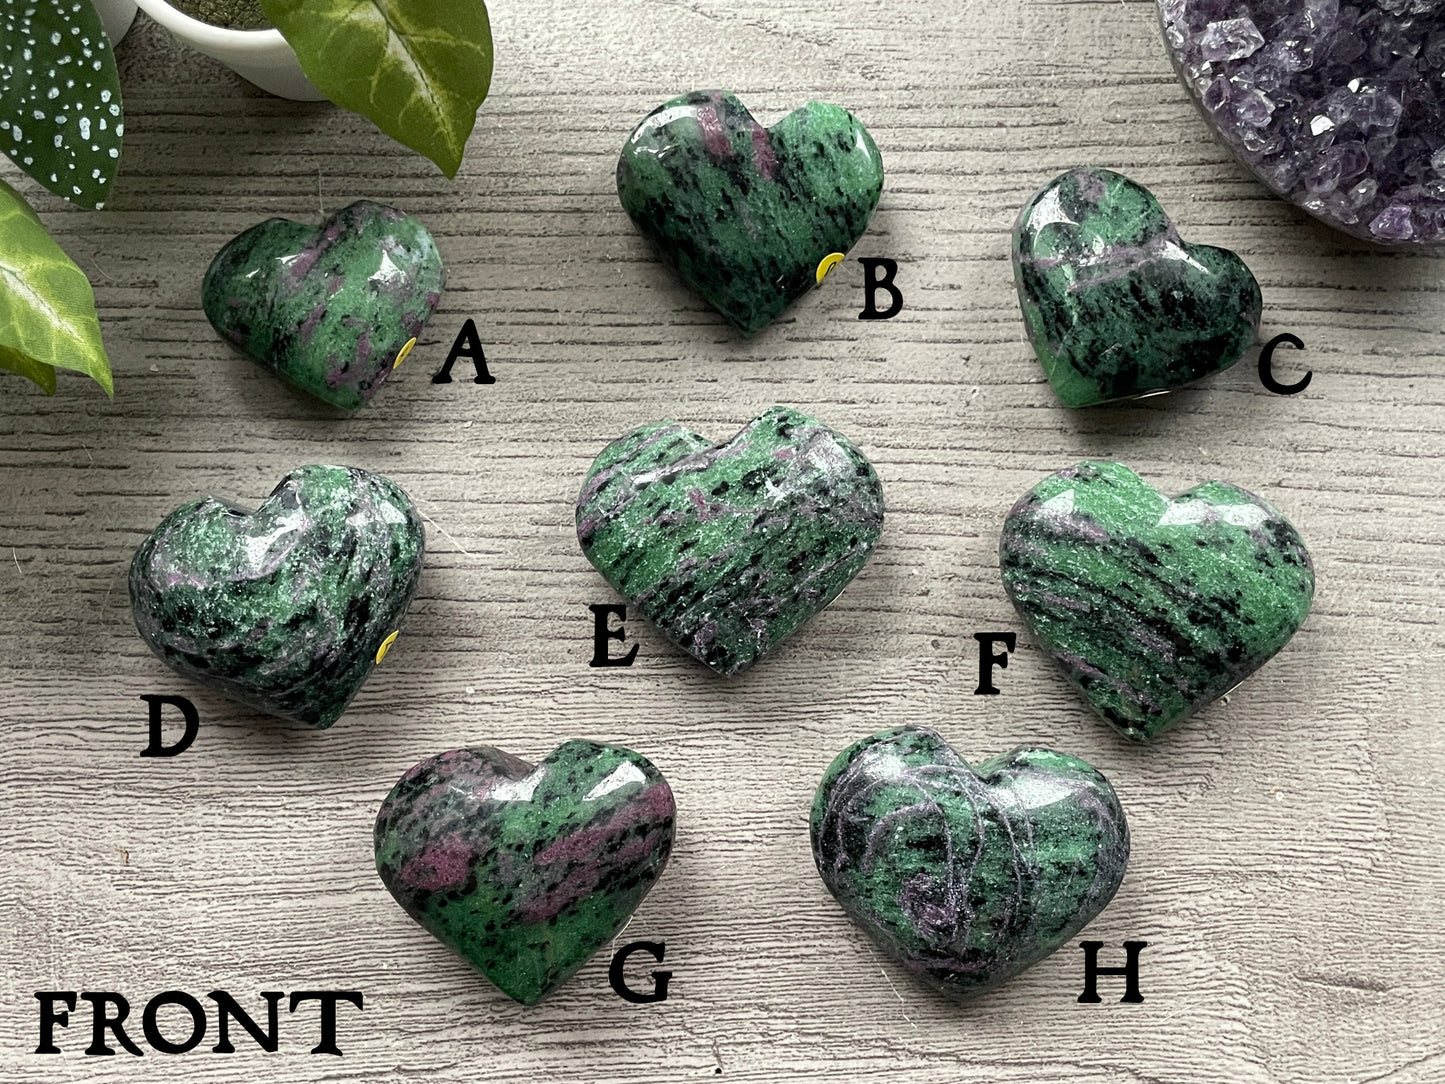 Pictured are various hearts carved out of ruby in zoisite.